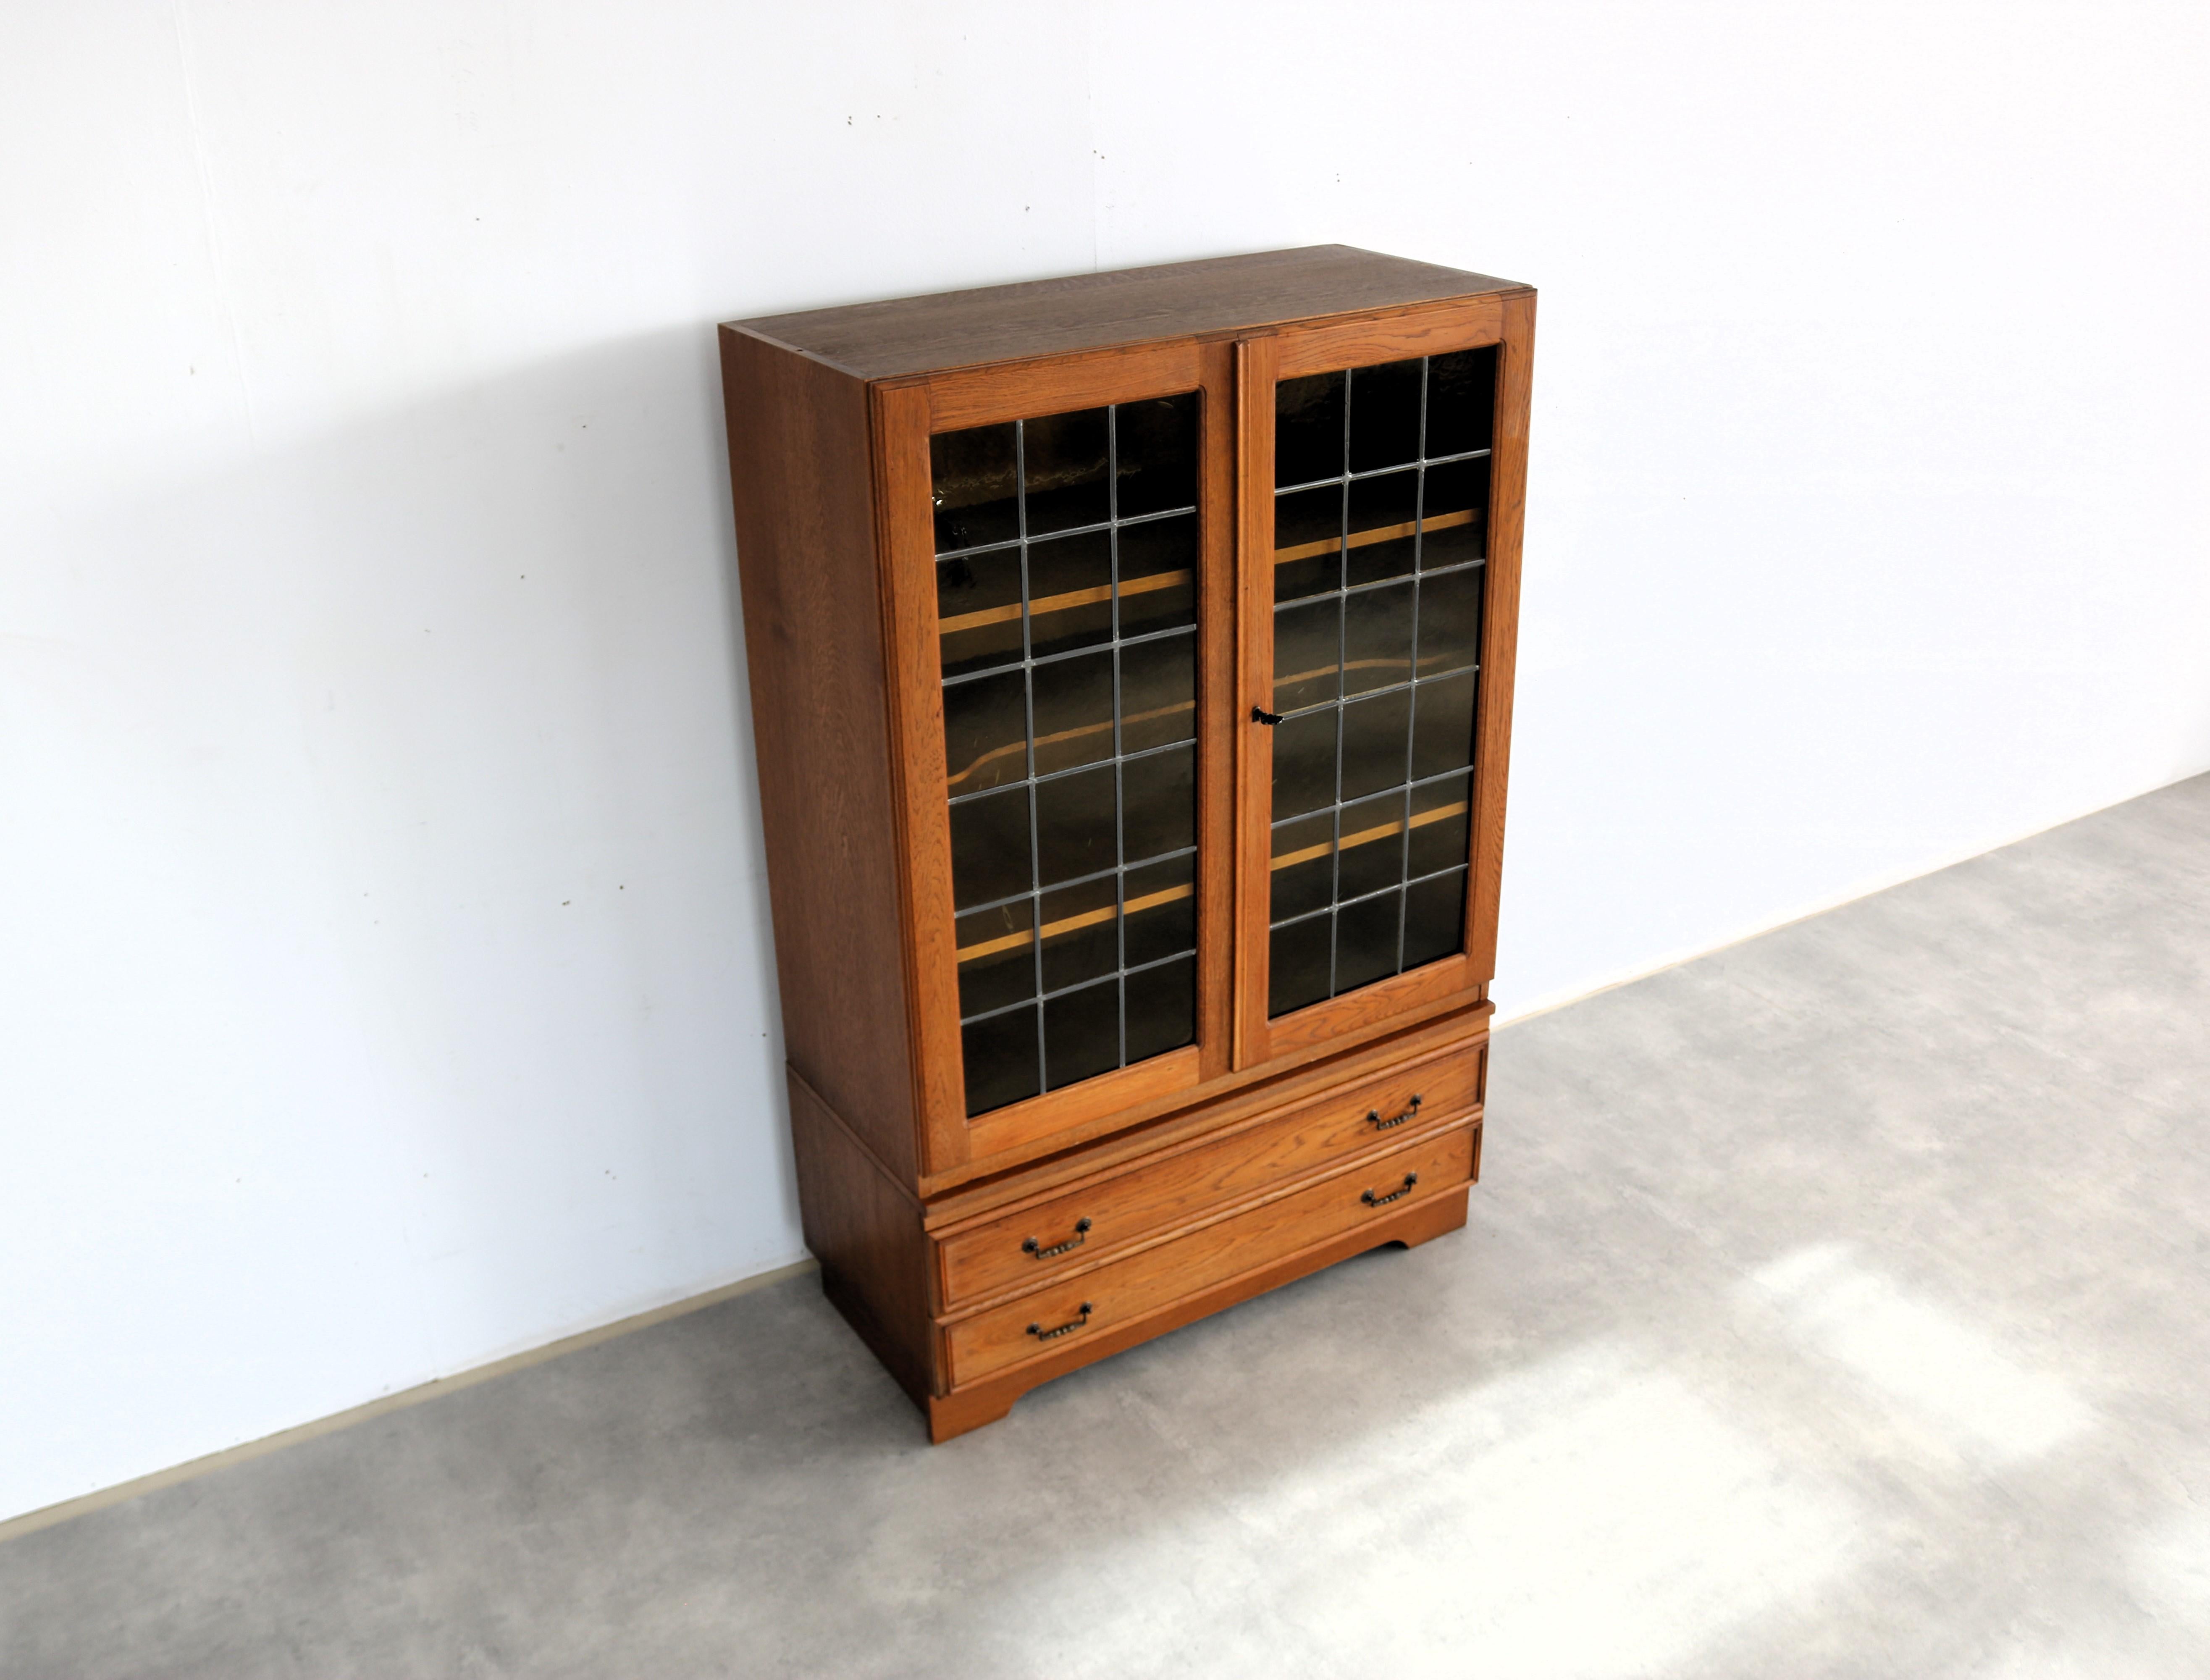  art deco display cabinet  sideboard  1950s For Sale 4